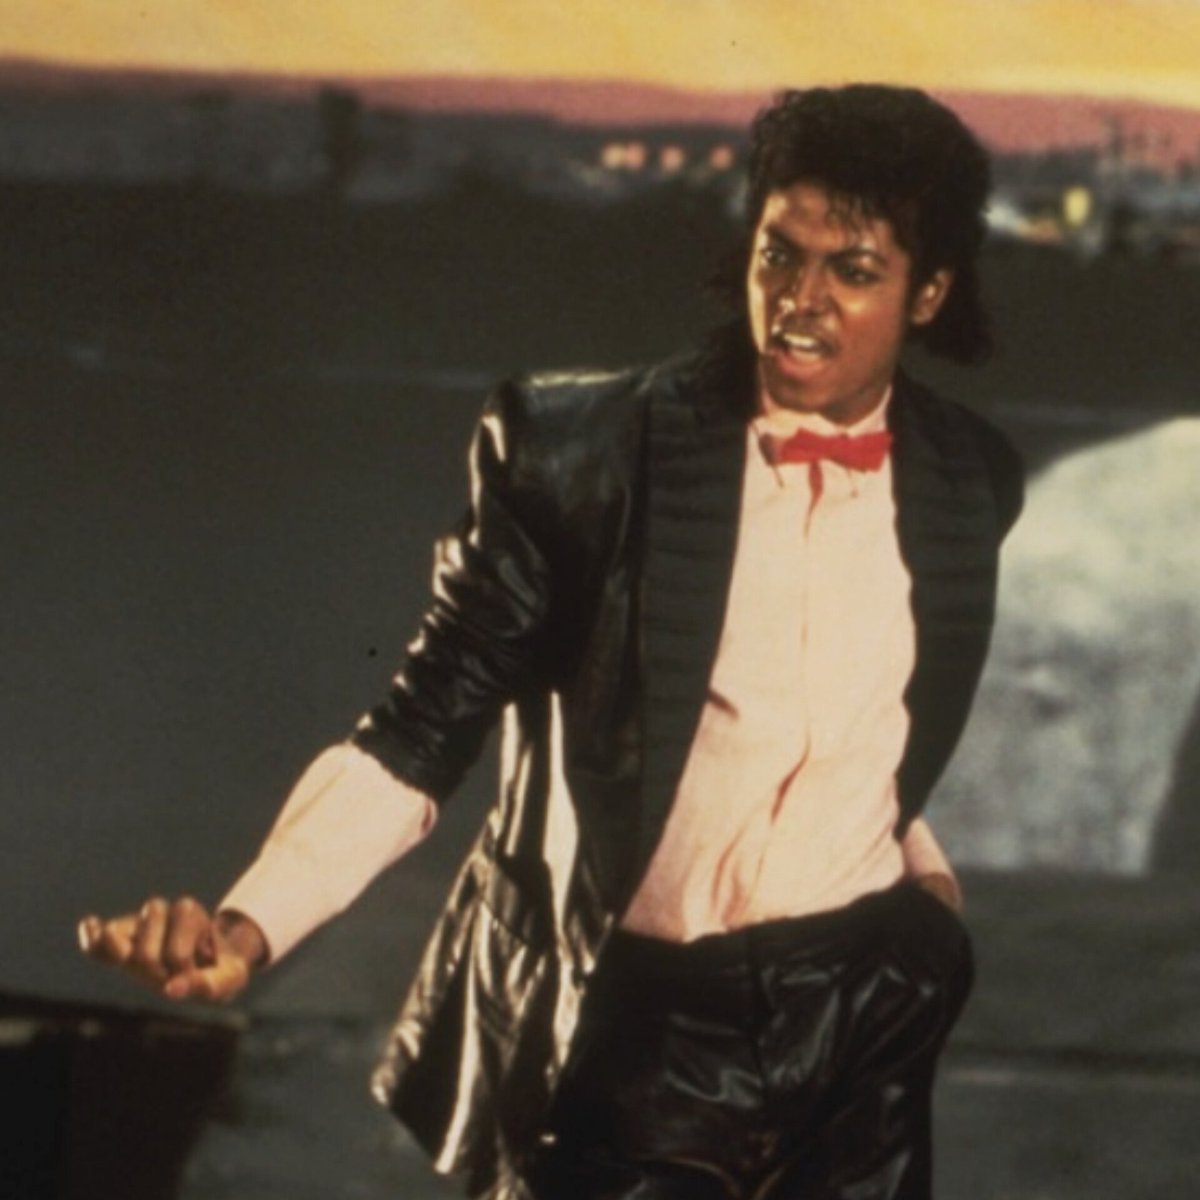 Michael Jackson's 'Billie Jean' is now the most watched solo artist video of the 20th century on YouTube.